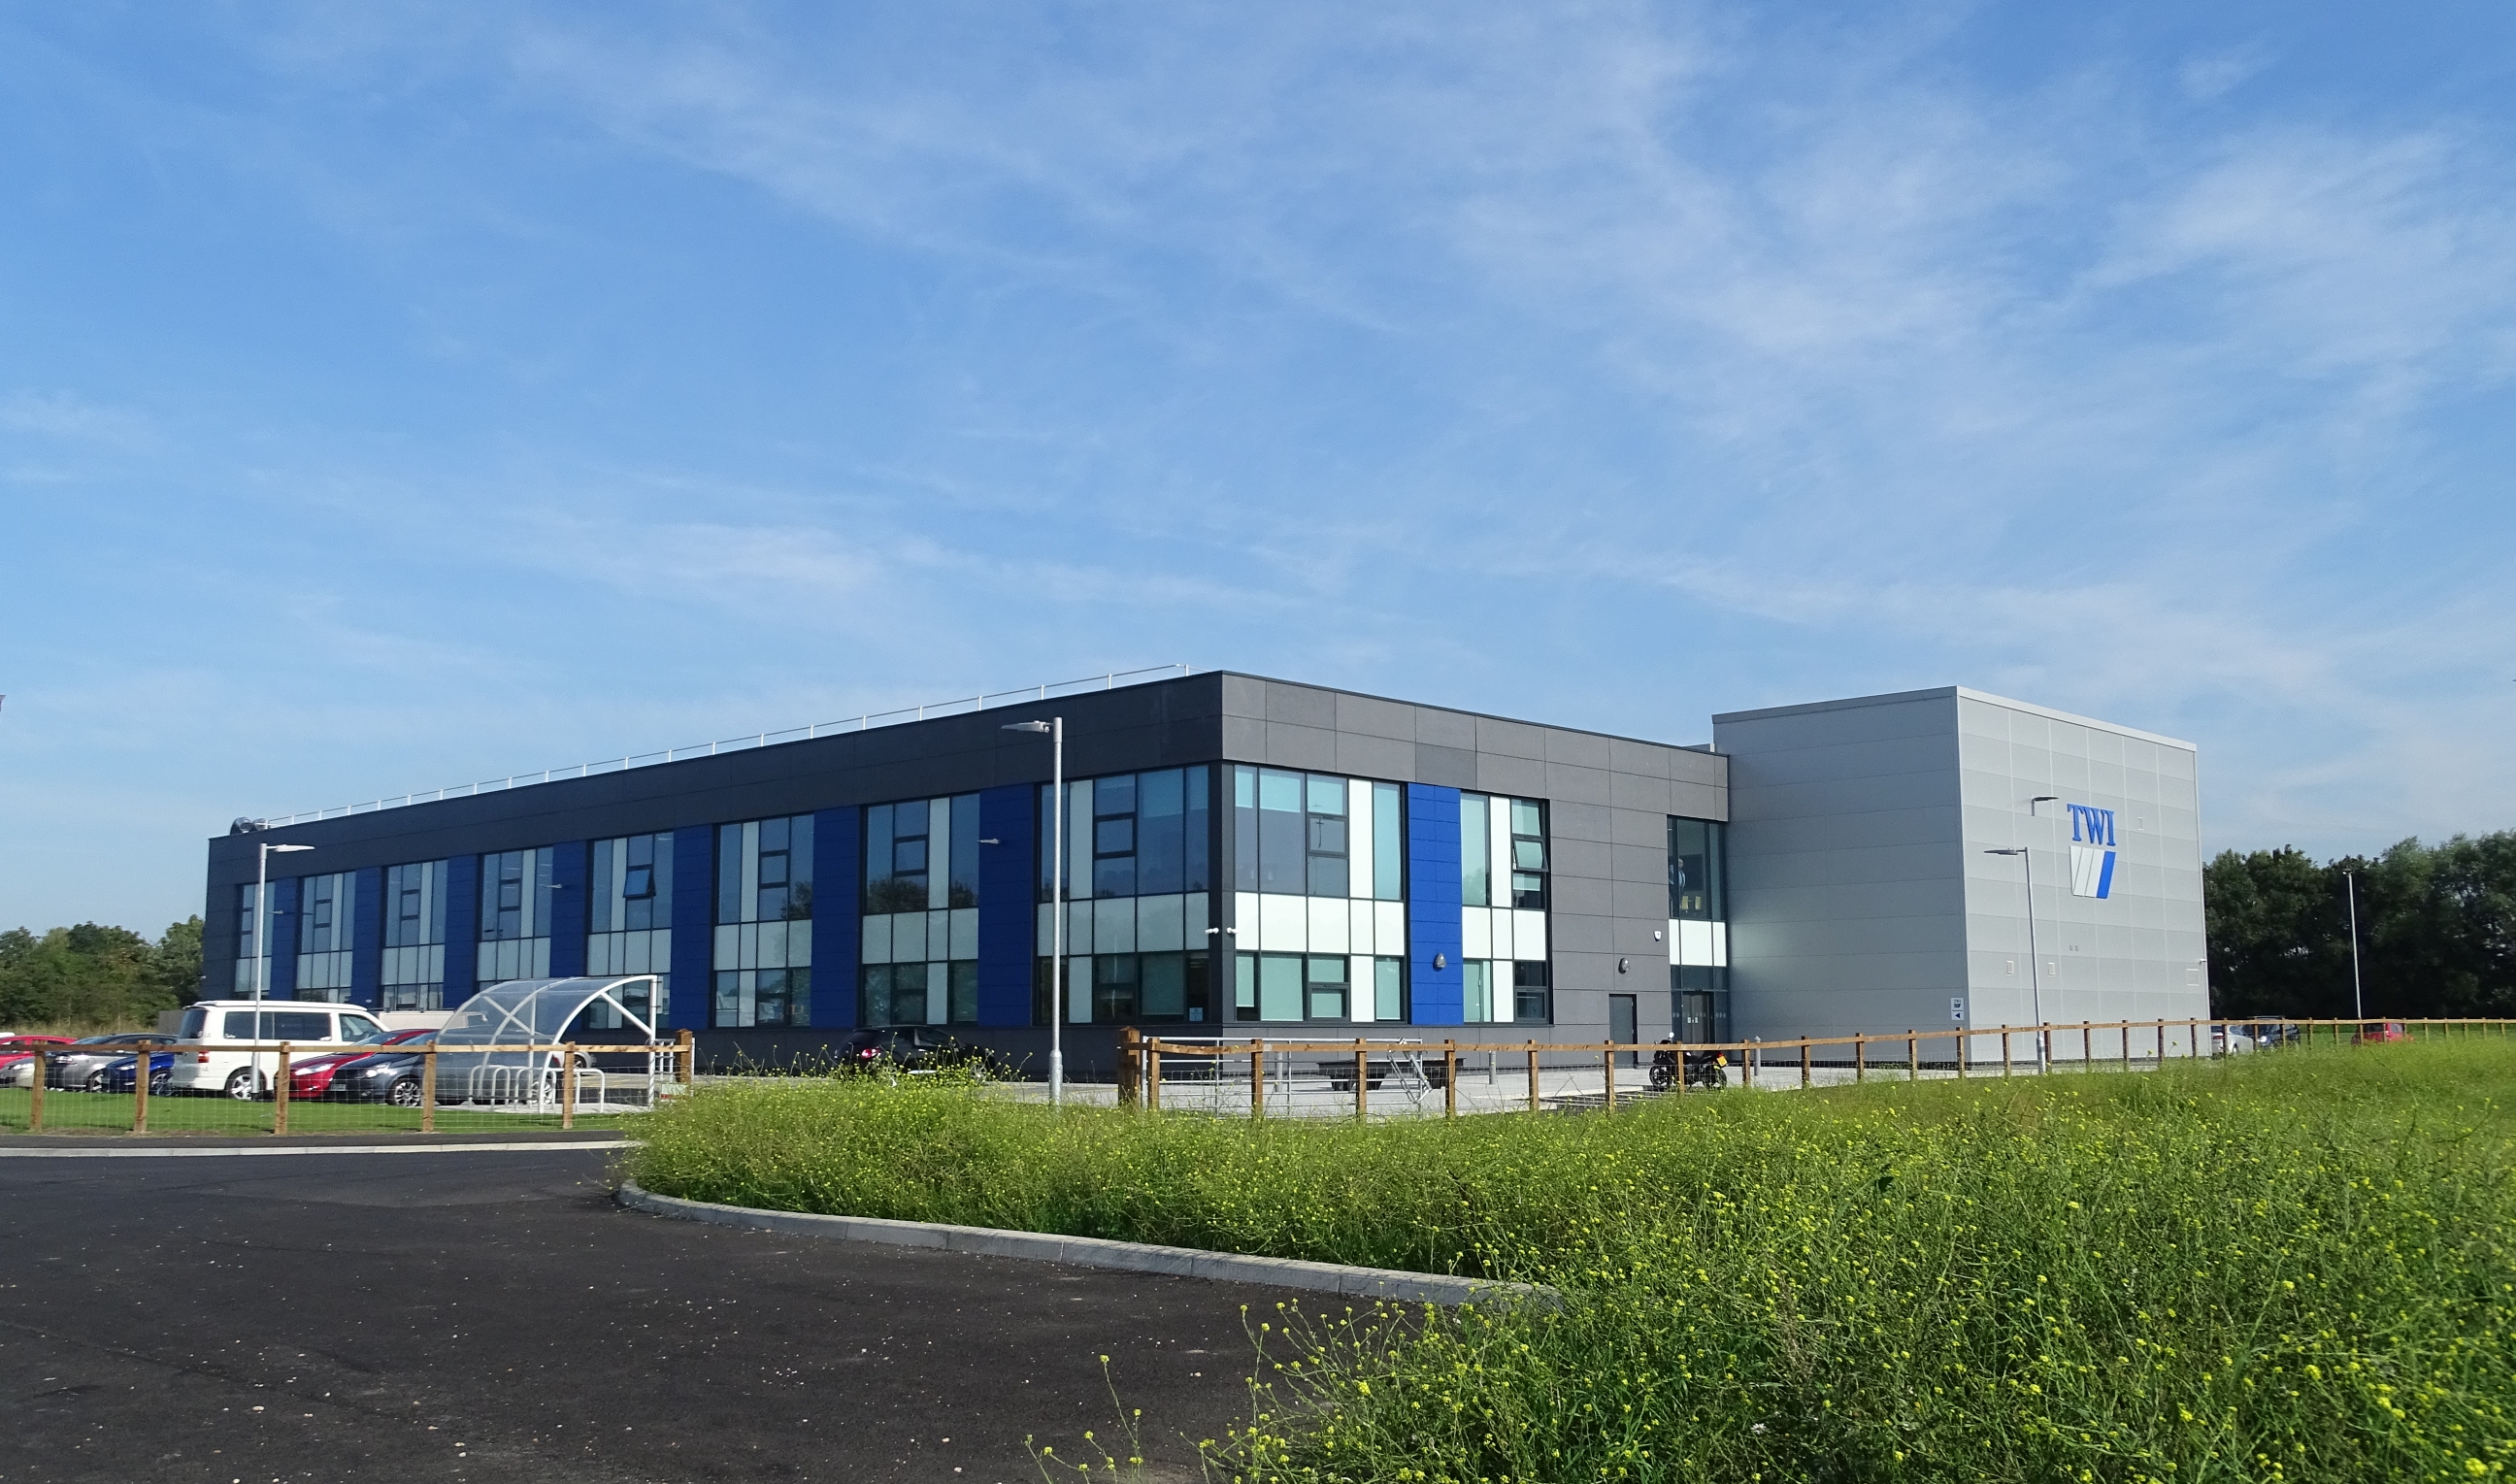 The new TWI Middlesbrough Technology and Training Centre